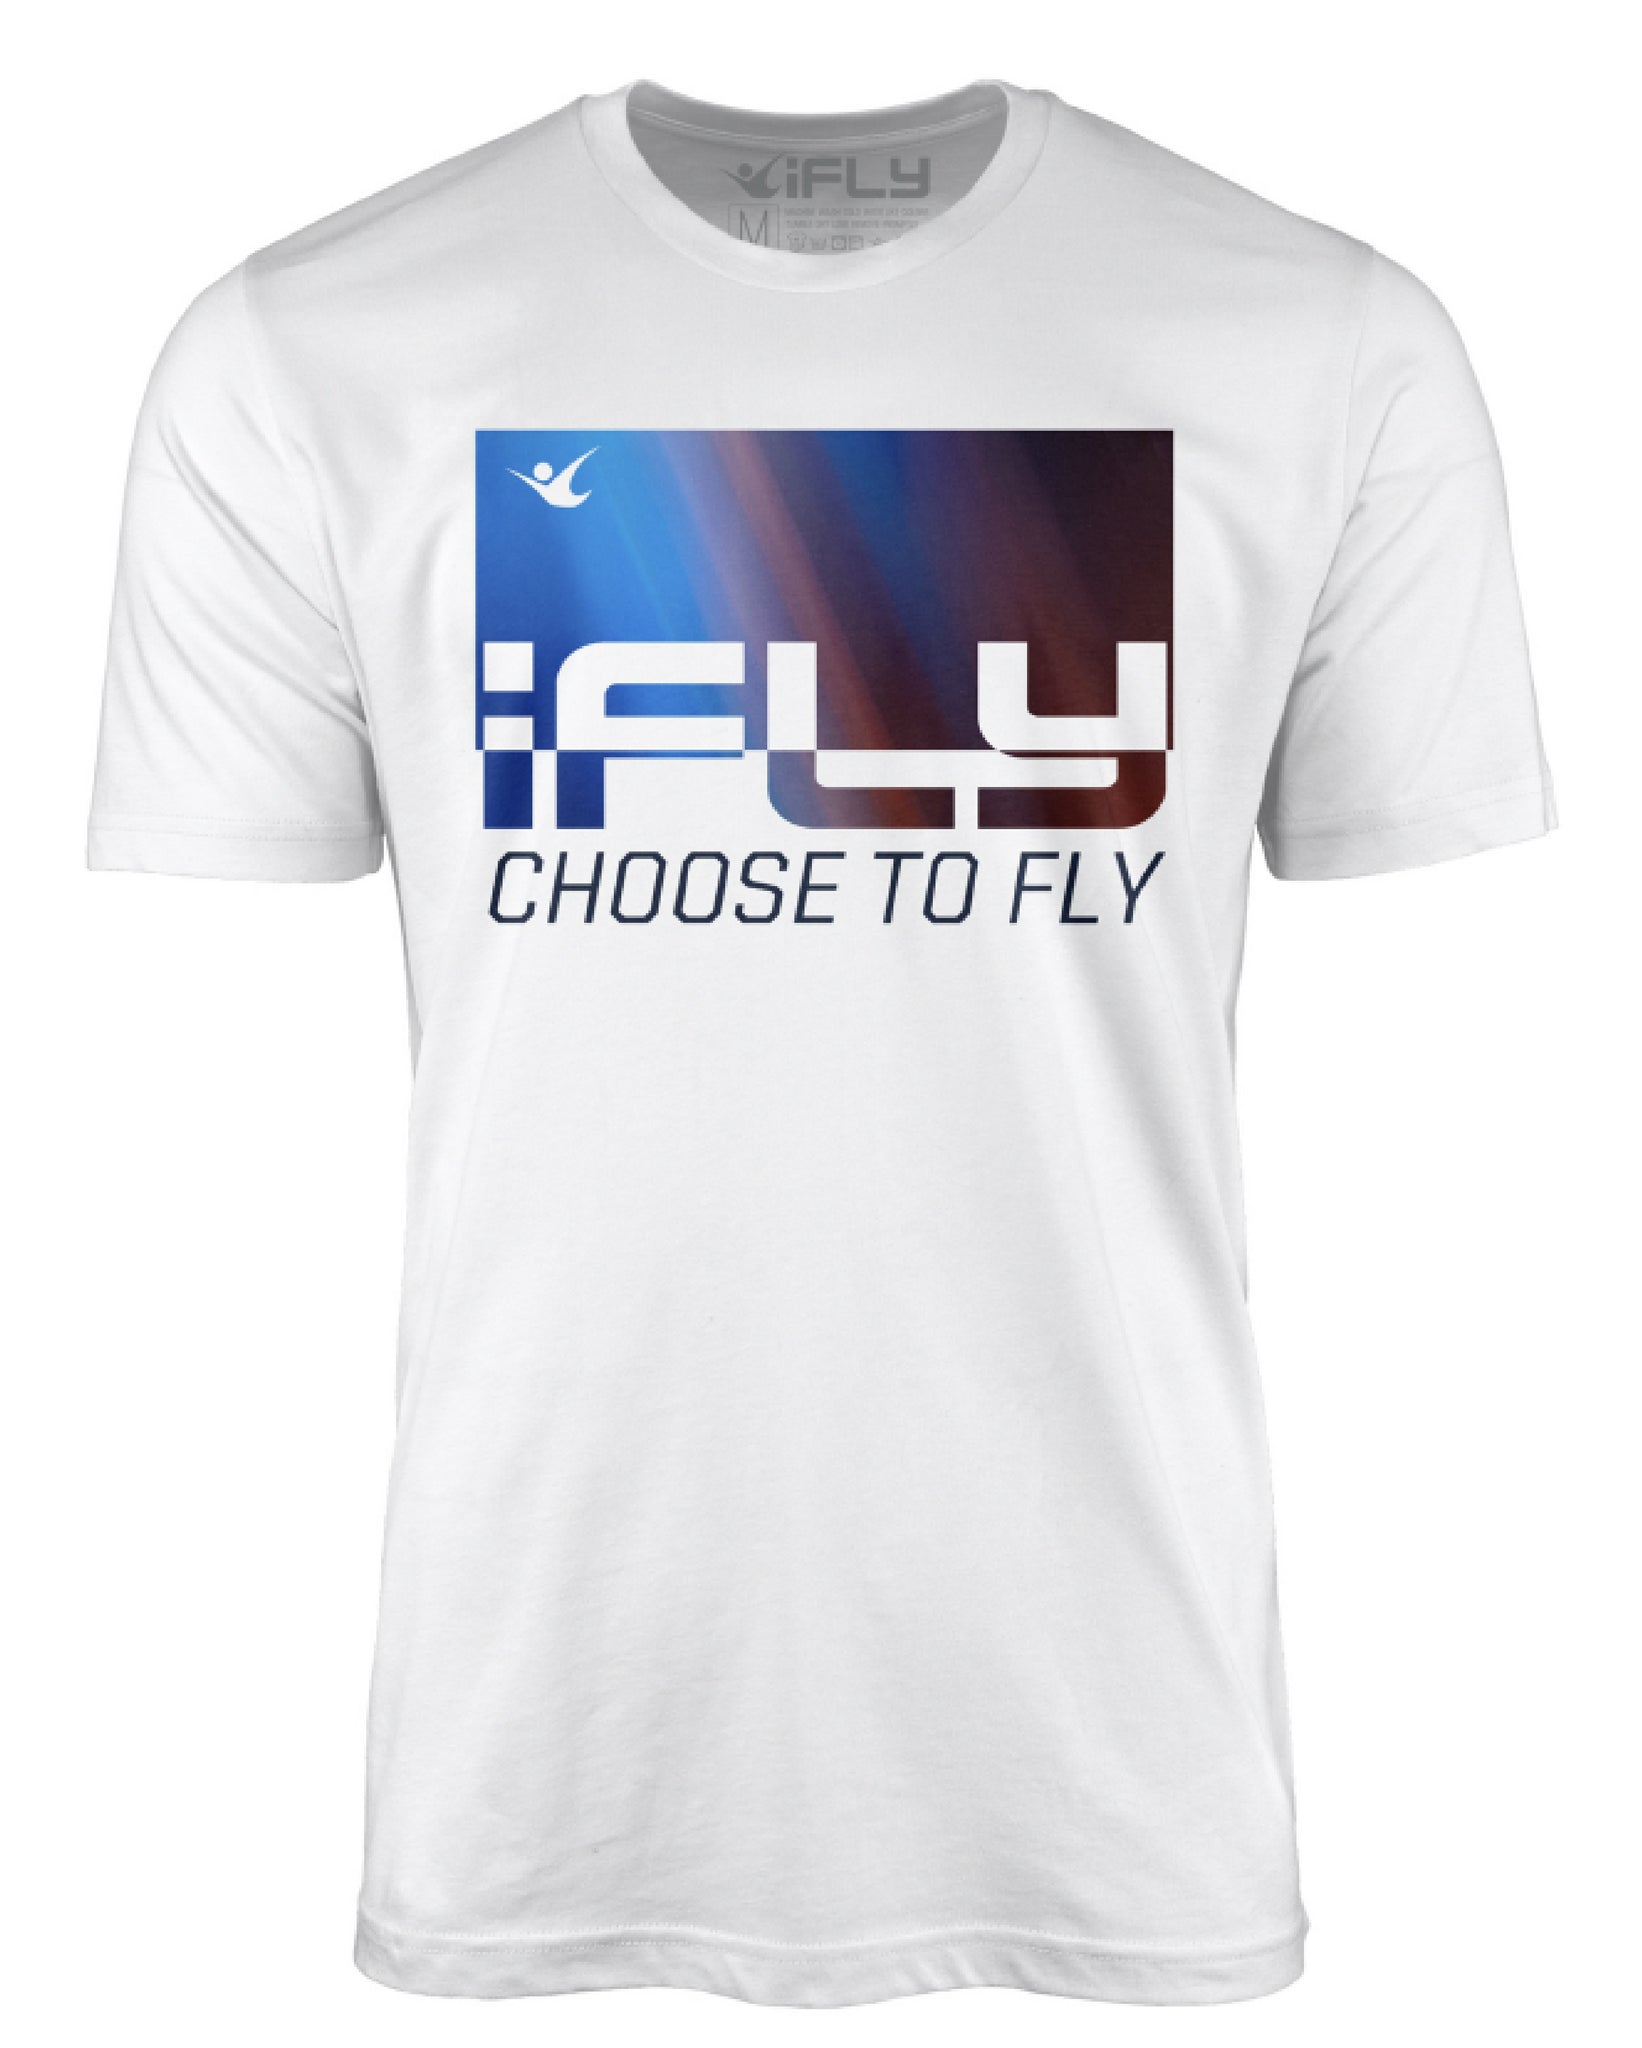 IFLY CHOOSE TO FLY TEE MENS